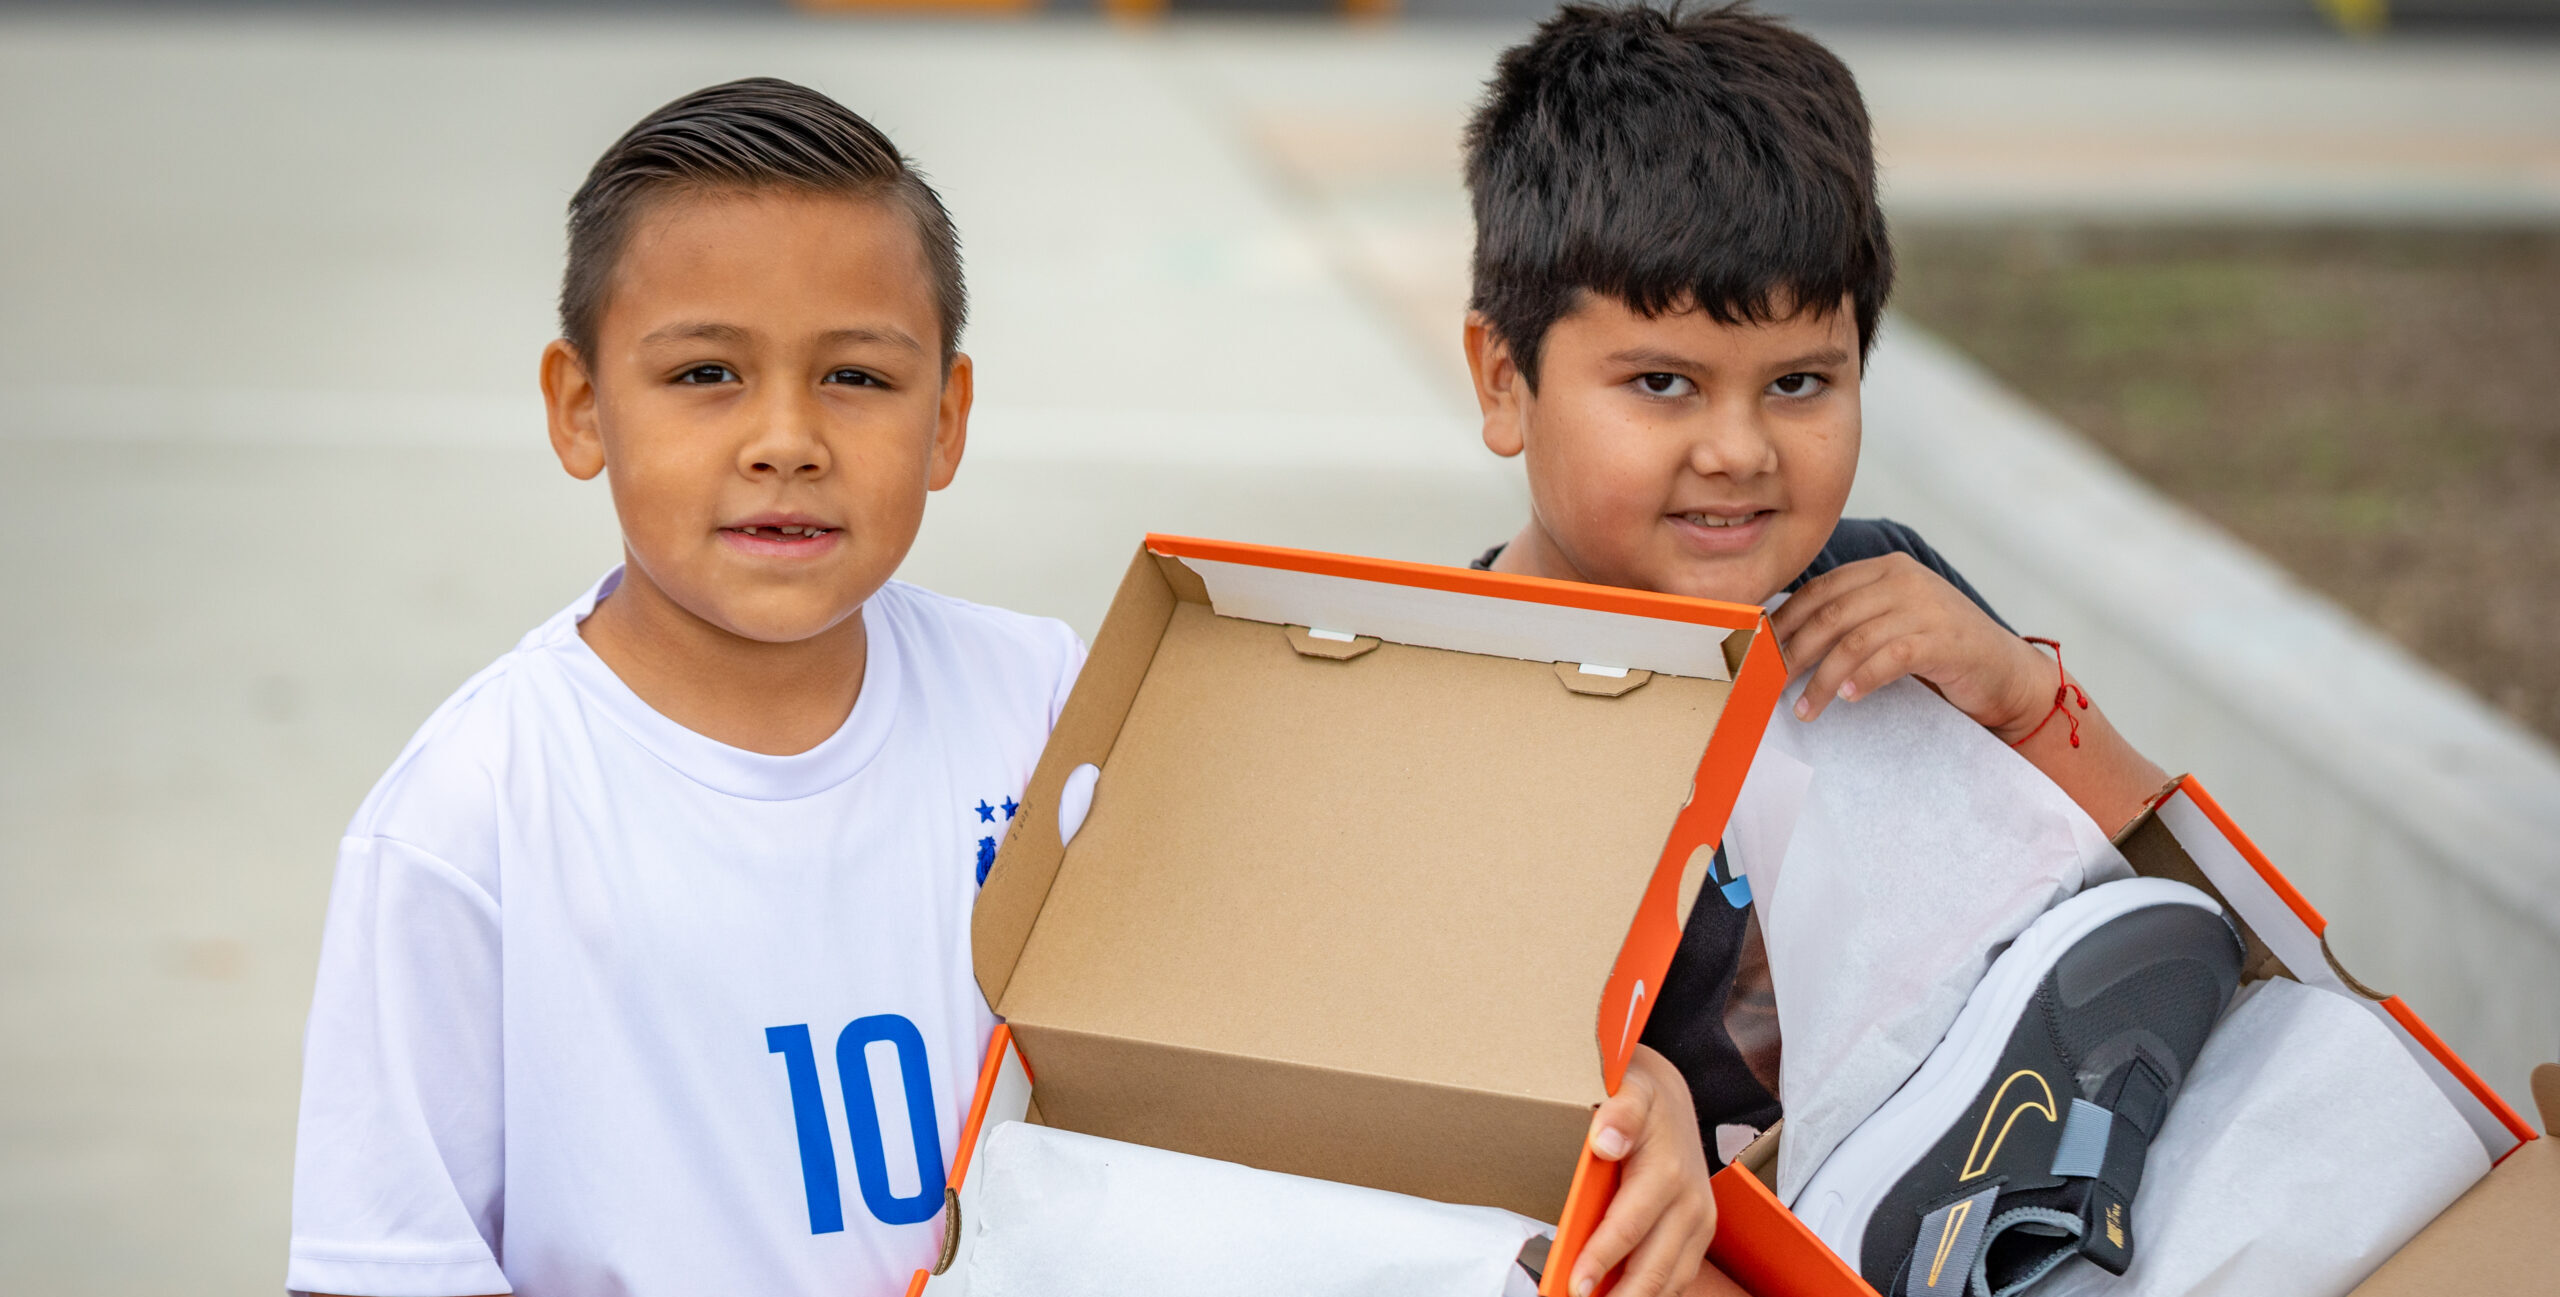 Nestlé NIDO® and Stater Bros. Bring Shoes to 630 Kids in San Bernardino